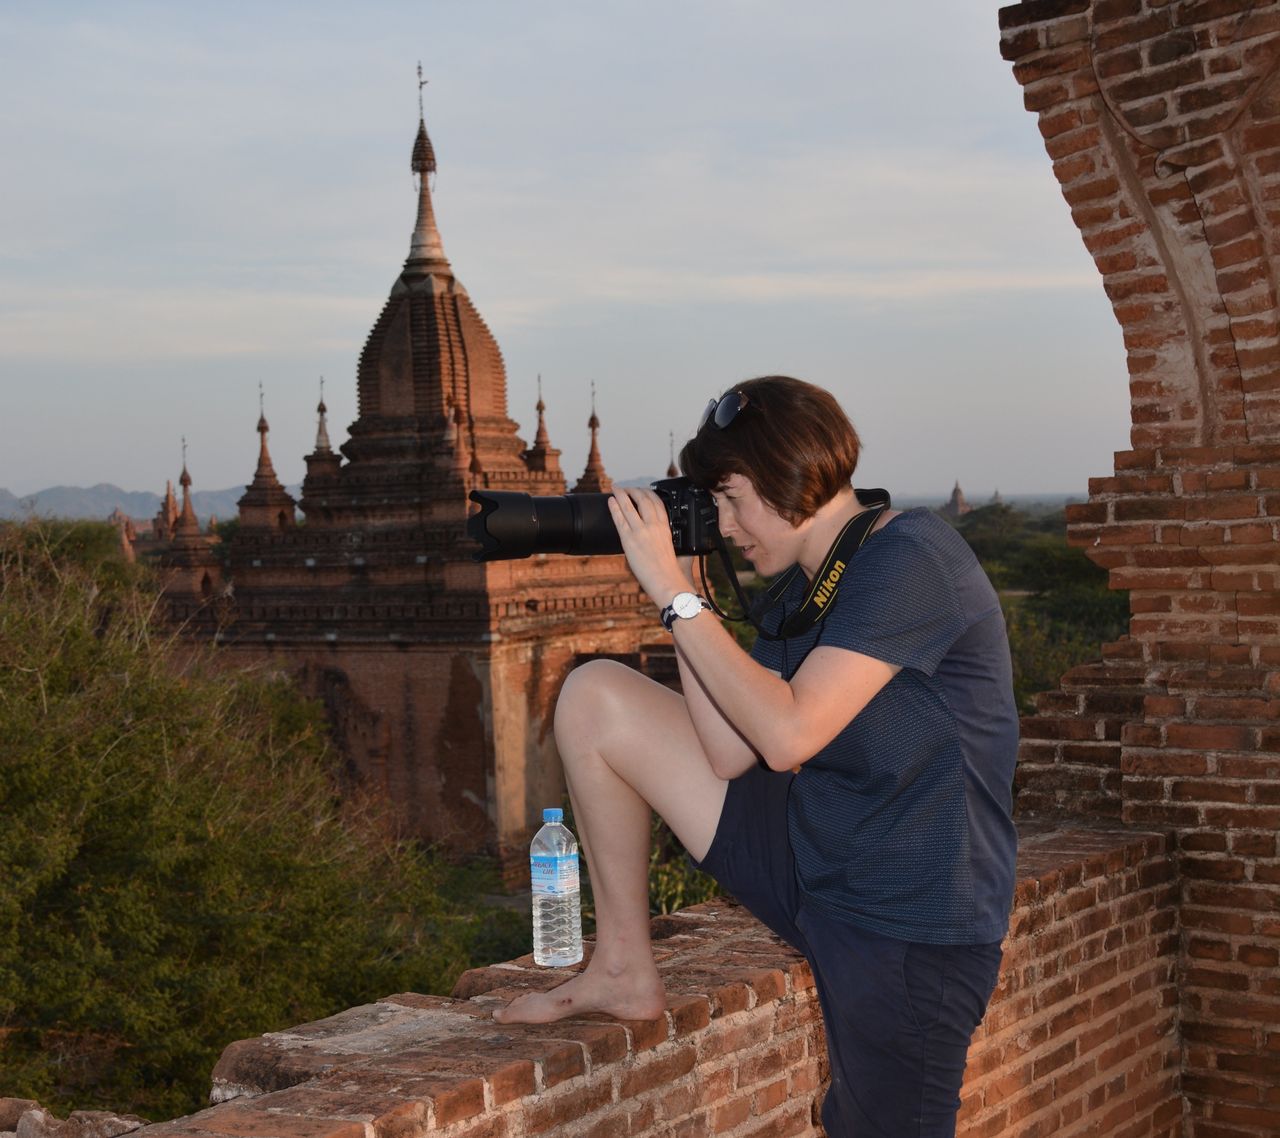 Harrison taking pictures in Bagan as inspiration for her etchings.